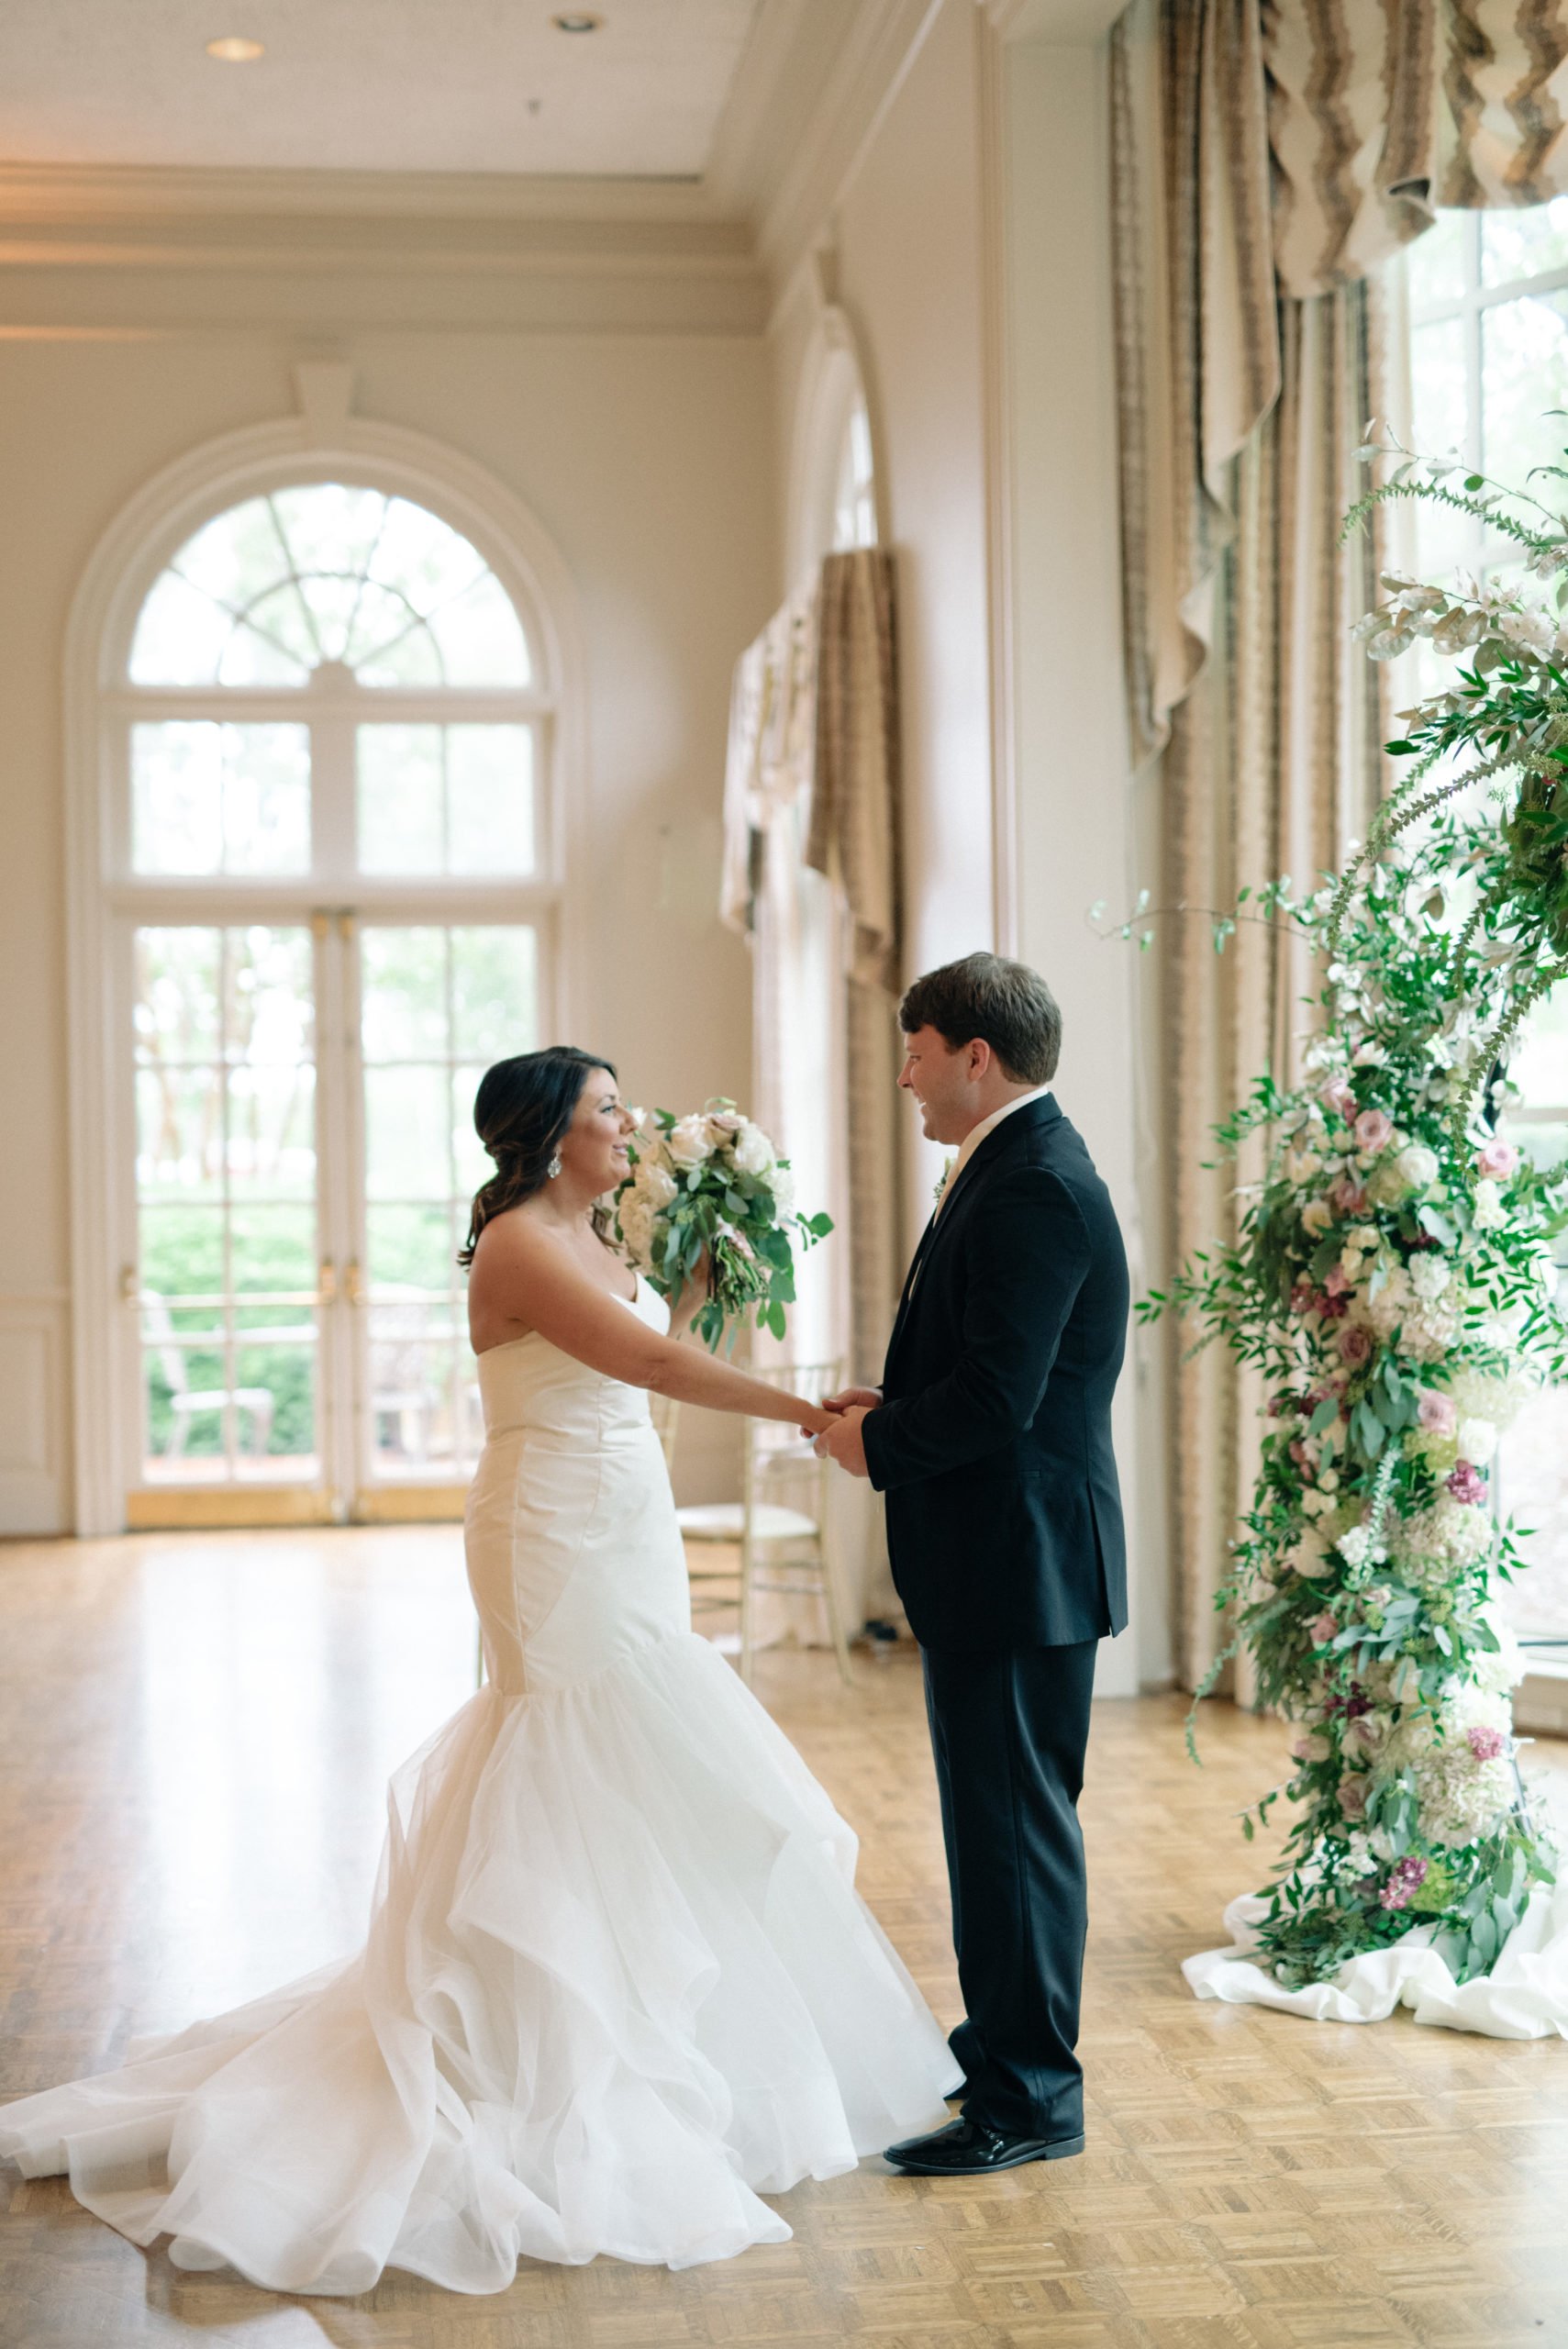 Vestavia Hills Country Club bride and groom first look by Olivia Joy Photography